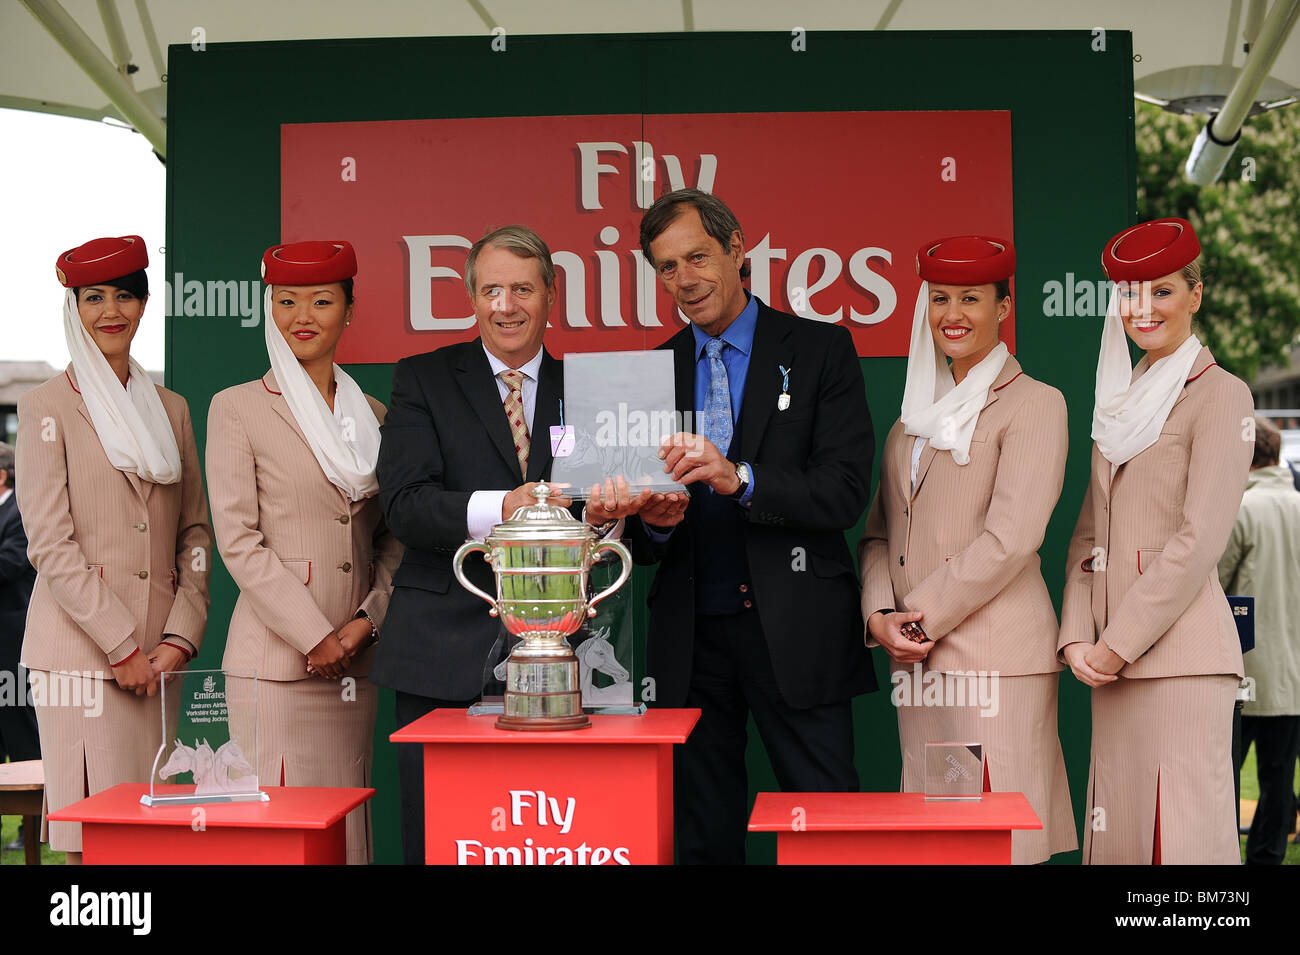 HENRY CECIL COLLECTS HIS WINNI EMIRATES AIRLINE YORKSHIRE CUP YORK RACECOURSE YORK ENGLAND 14 May 2010 Stock Photo